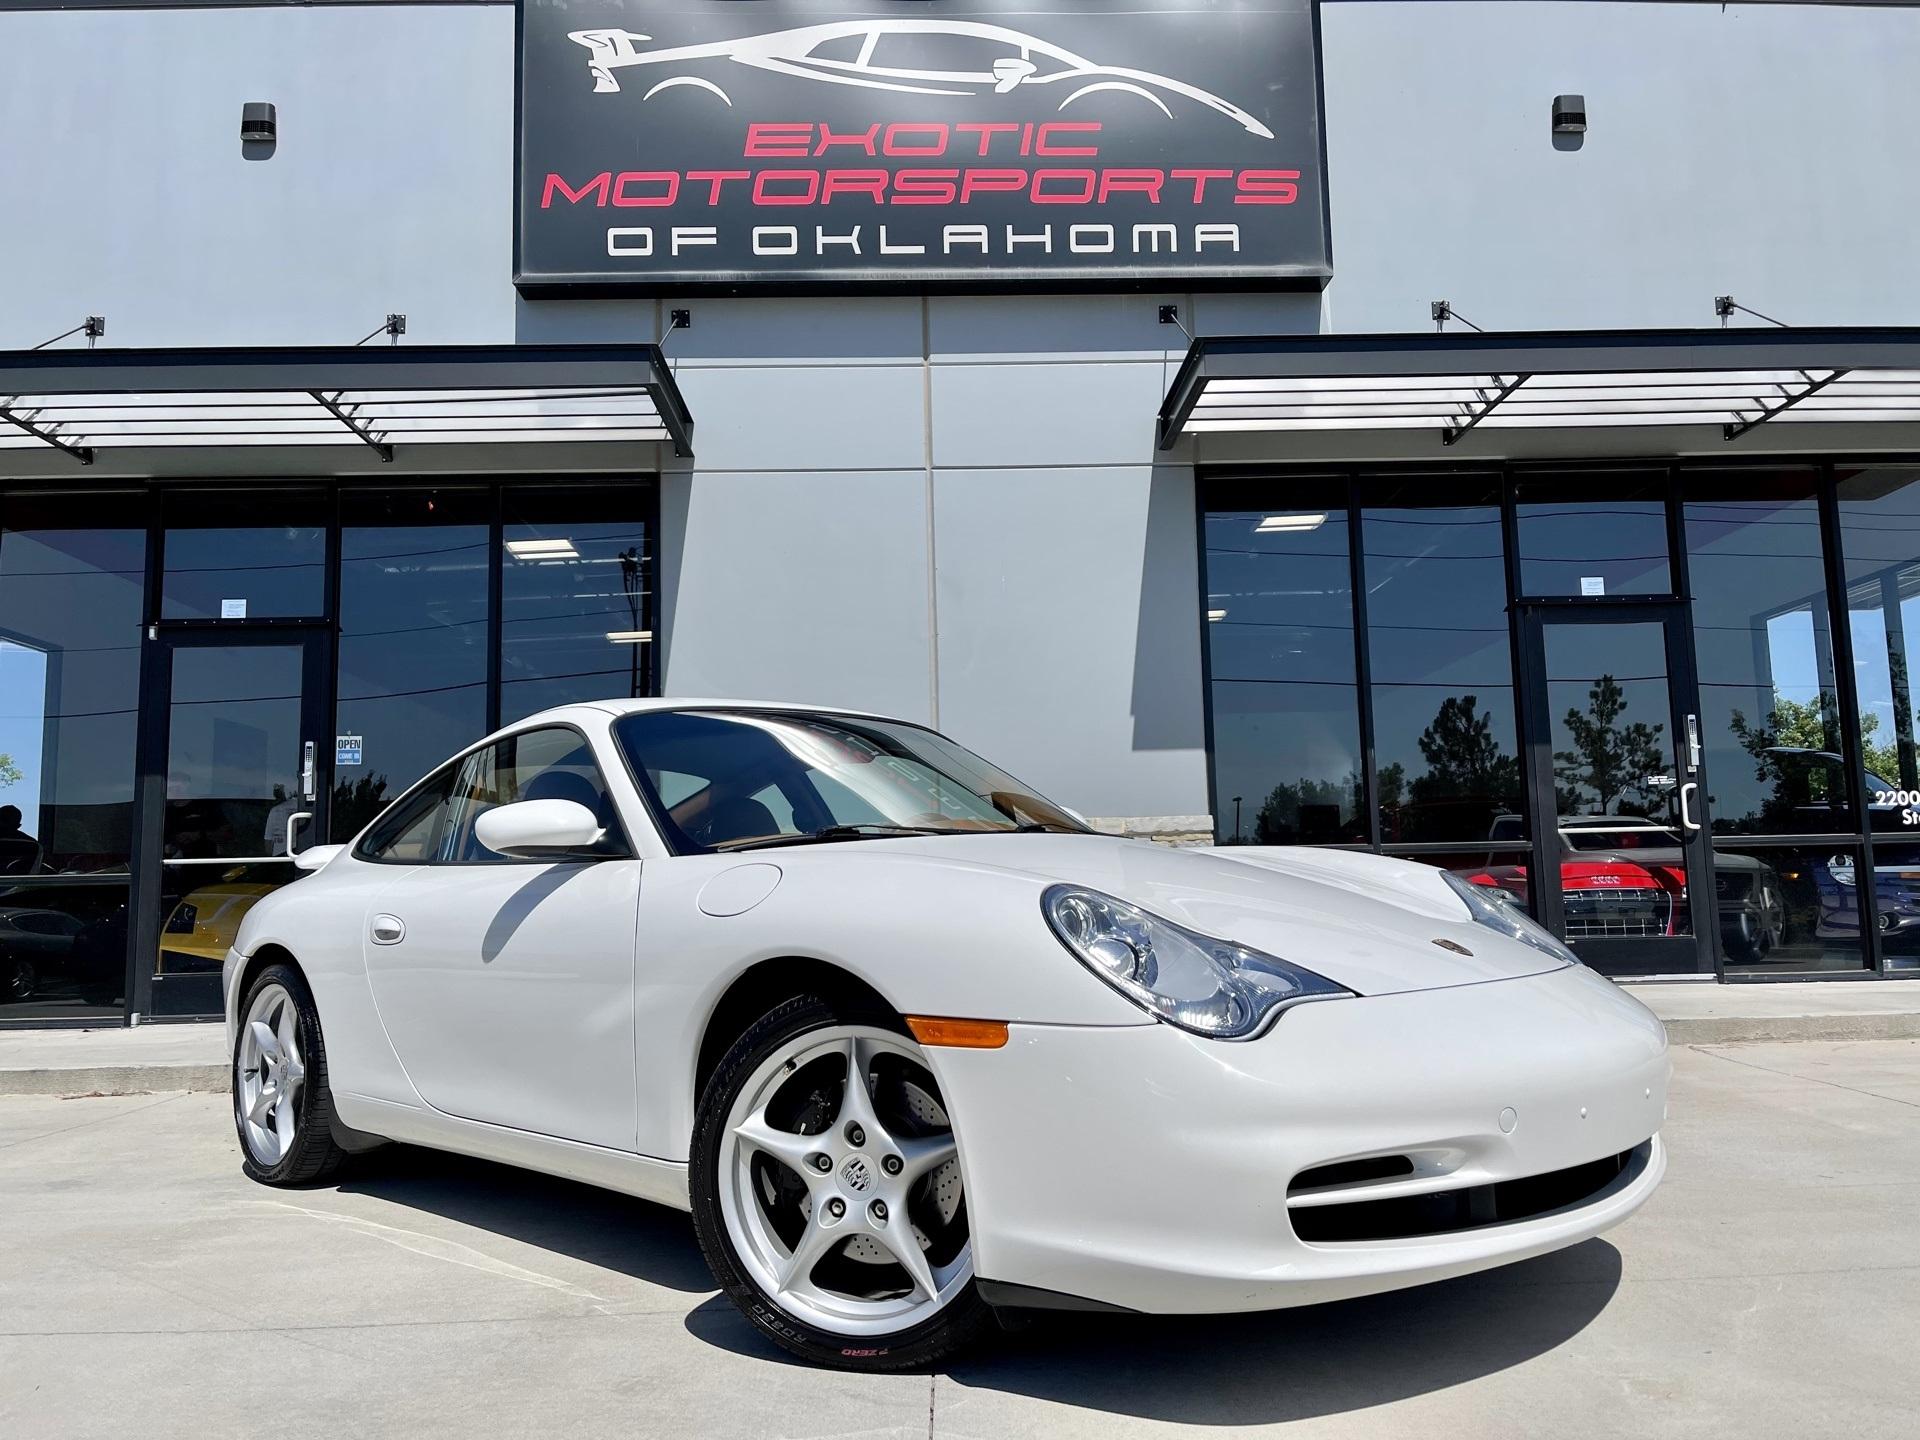 Used 2004 Porsche 911 Carrera For Sale (Sold) | Exotic Motorsports of  Oklahoma Stock #A71